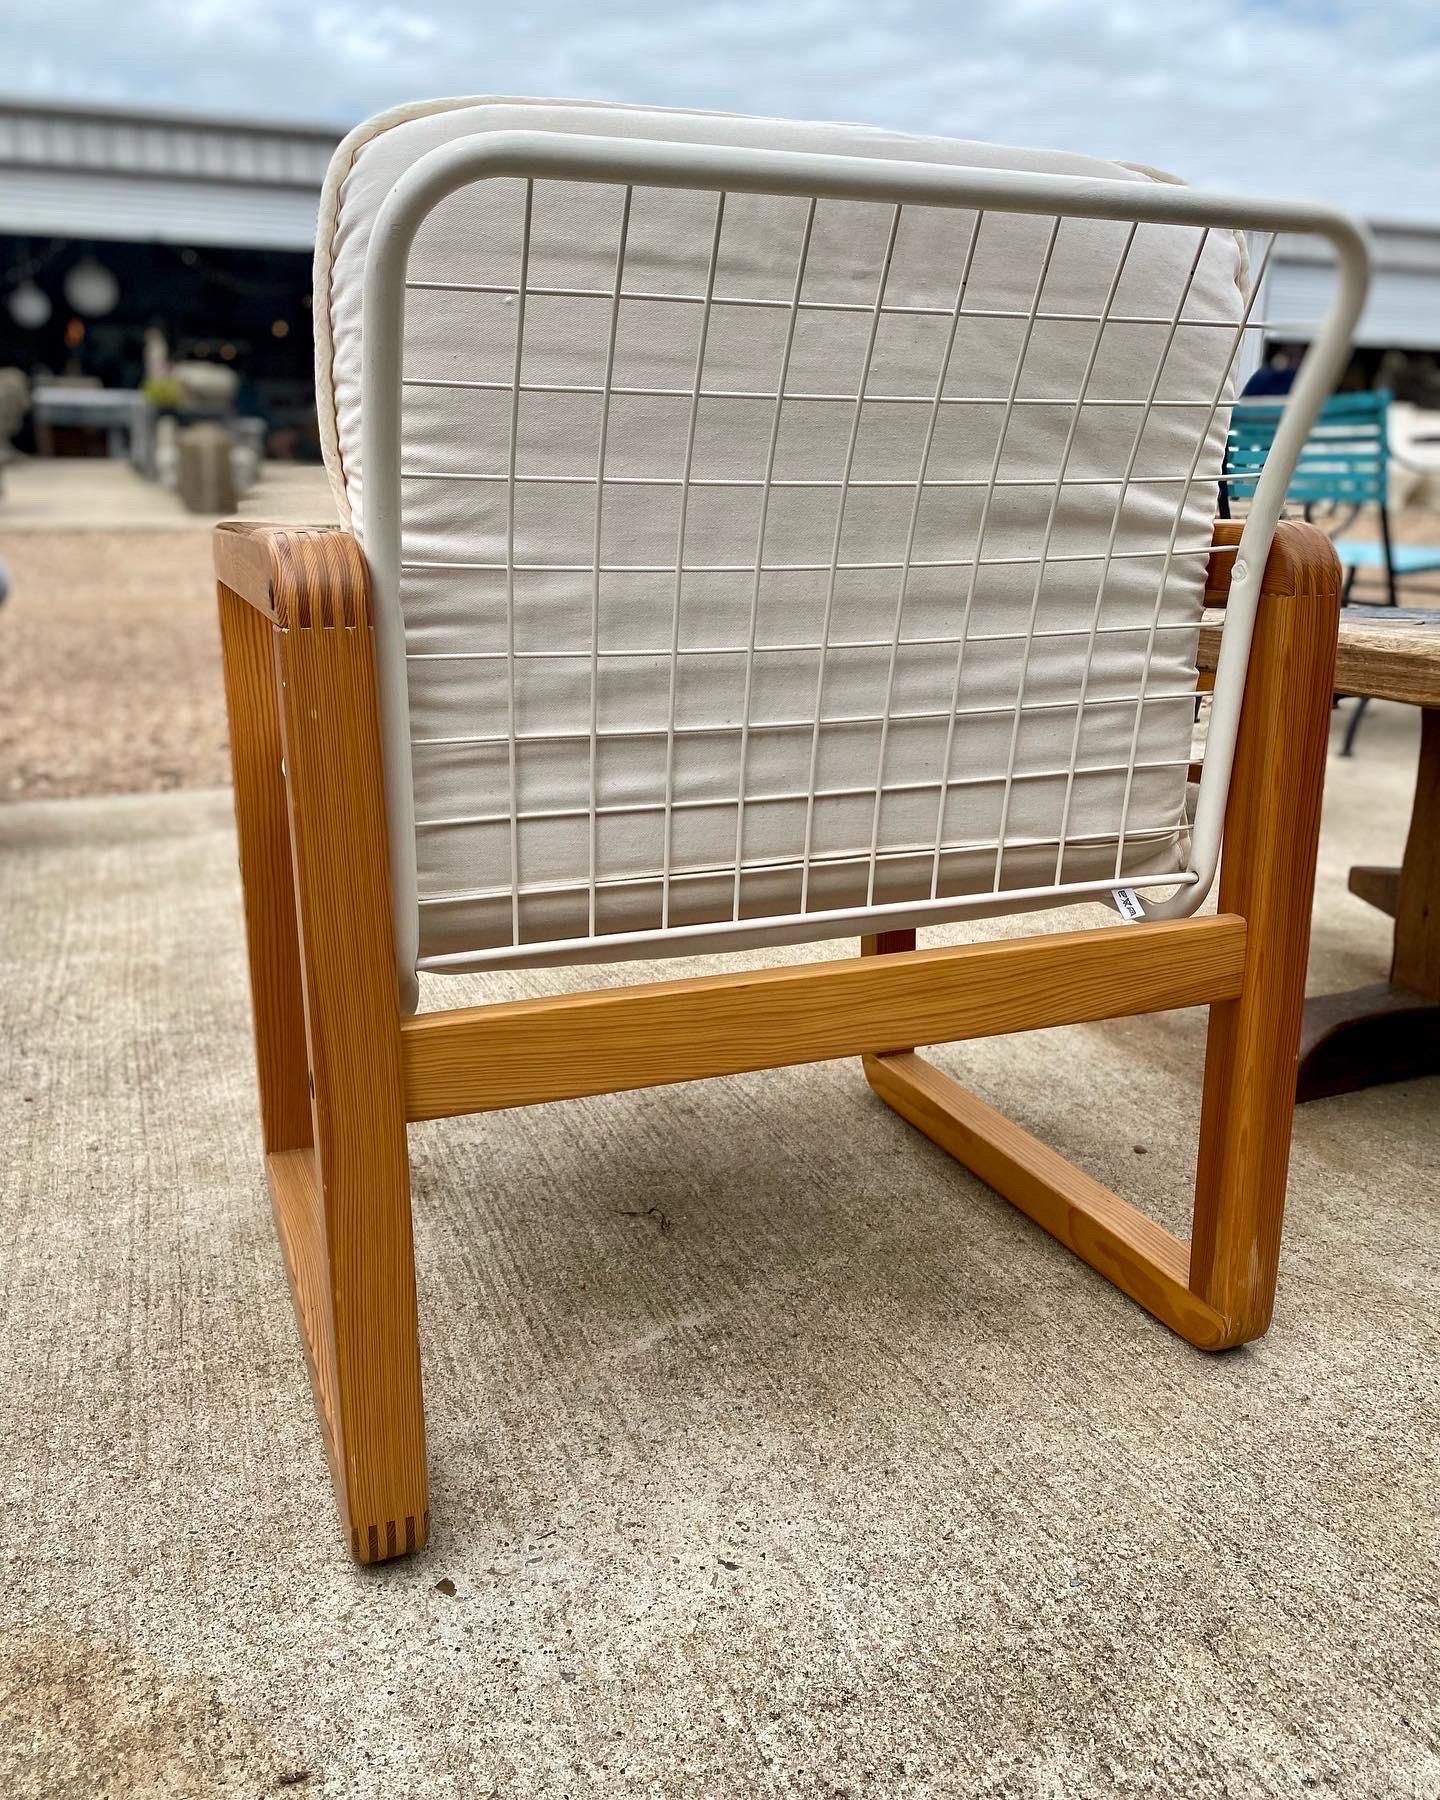 Vintage Salen armchair by Knut & Marianne Hagberg for IKEA, 1980s.  Made of pine and wire frame, this chair is in good overall condition. 

Dimensions: 25